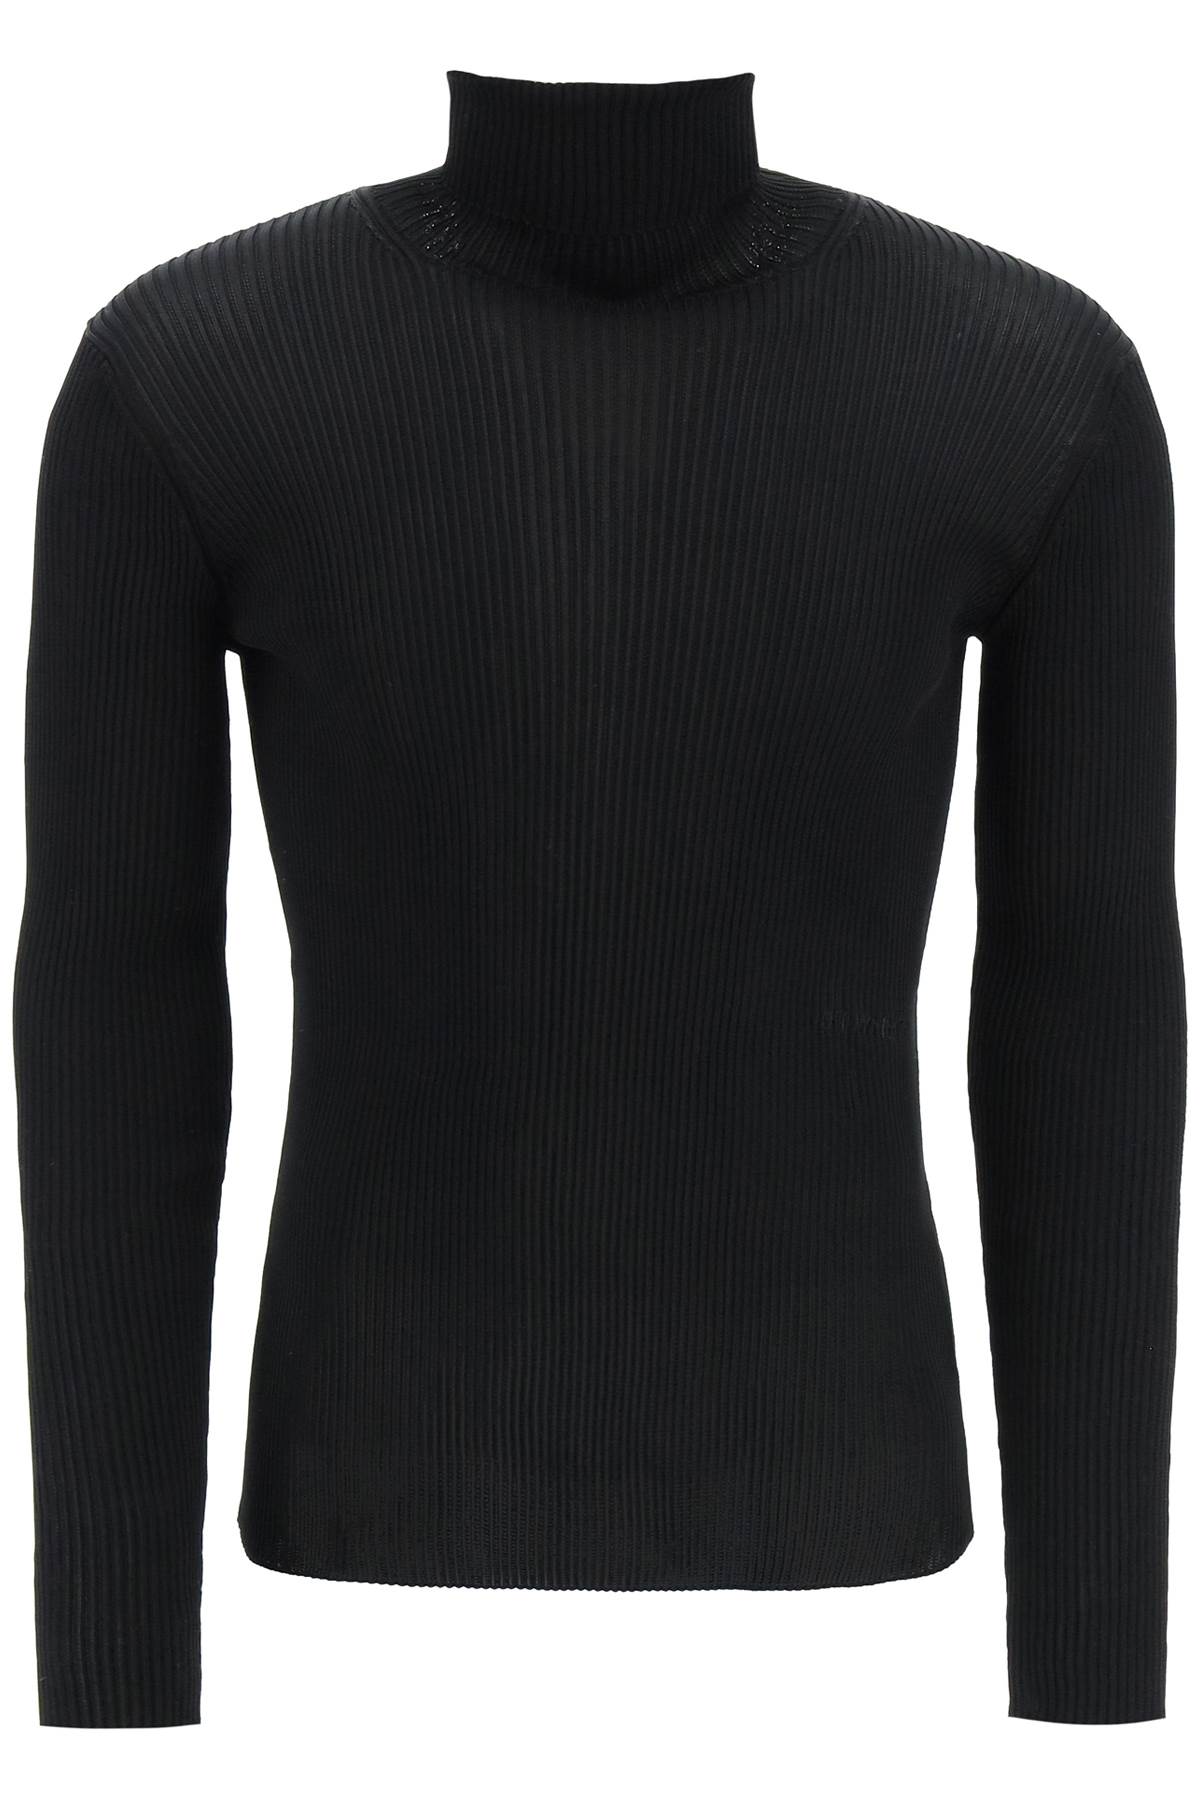 Off-White Ribbed Techno Knit Turtleneck Sweater